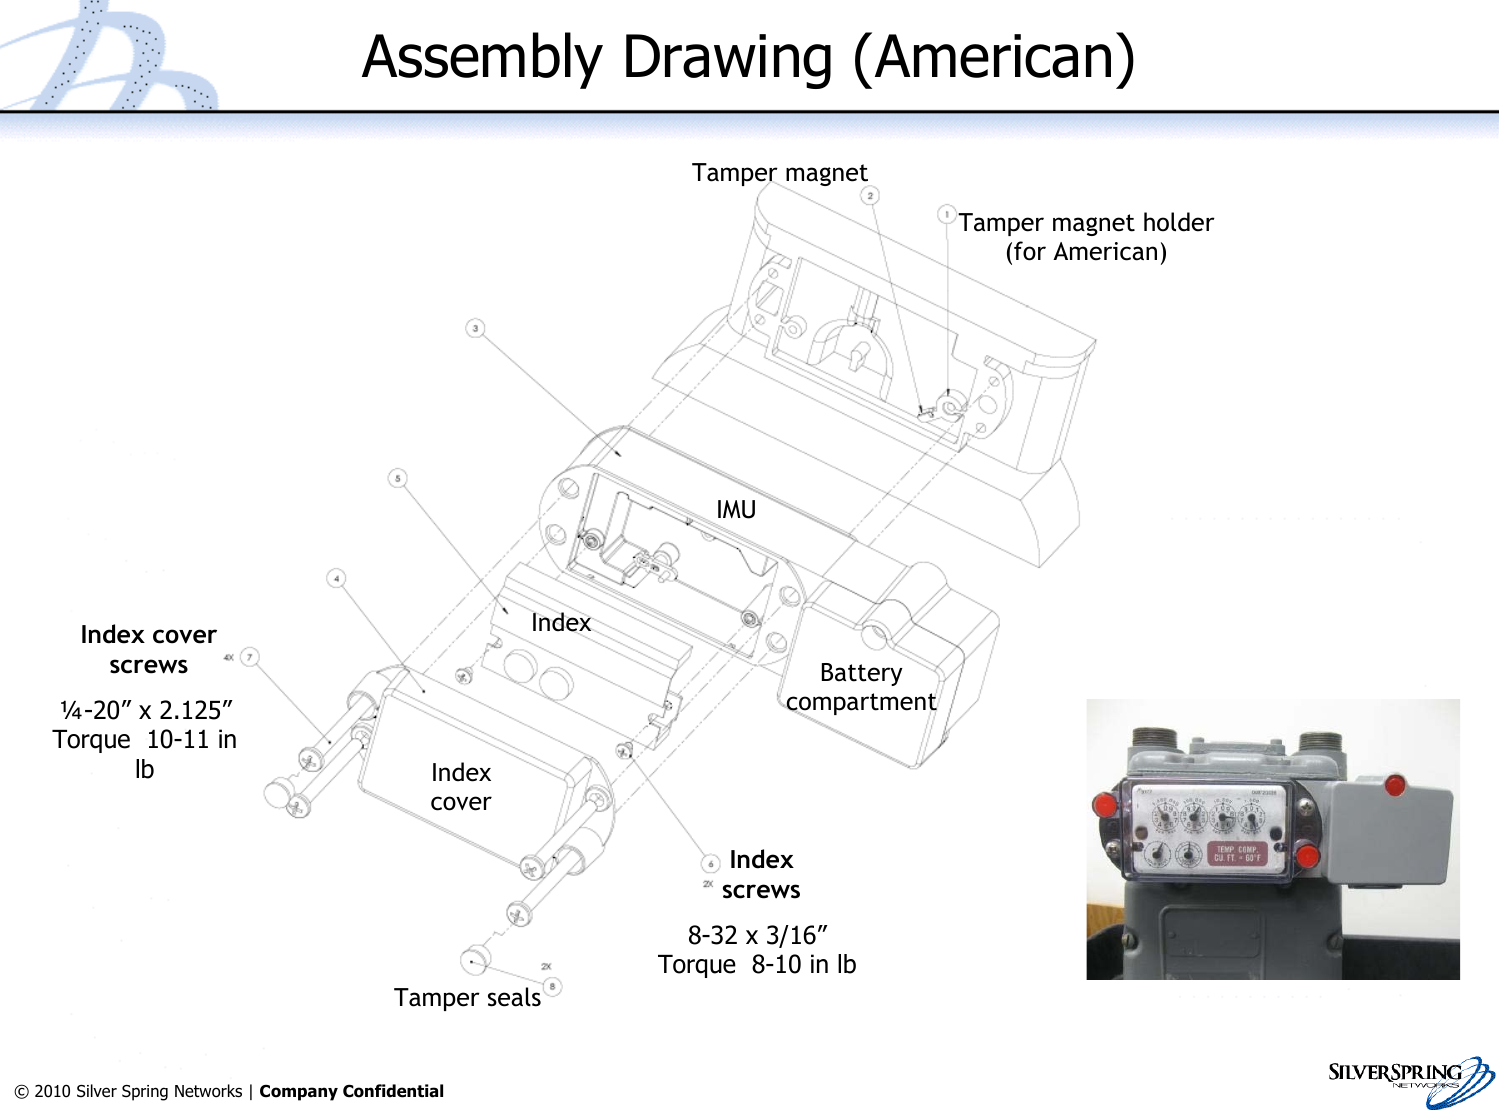 7© 2010 Silver Spring Networks | Company Confidential Assembly Drawing (American)IndexcoverIndexscrewsIndex coverscrewsTamper sealsTamper magnet holder(for American)Tamper magnetIMUIndexBatterycompartment¼-20” x 2.125”Torque  10-11 inlb8-32 x 3/16”Torque  8-10 in lb